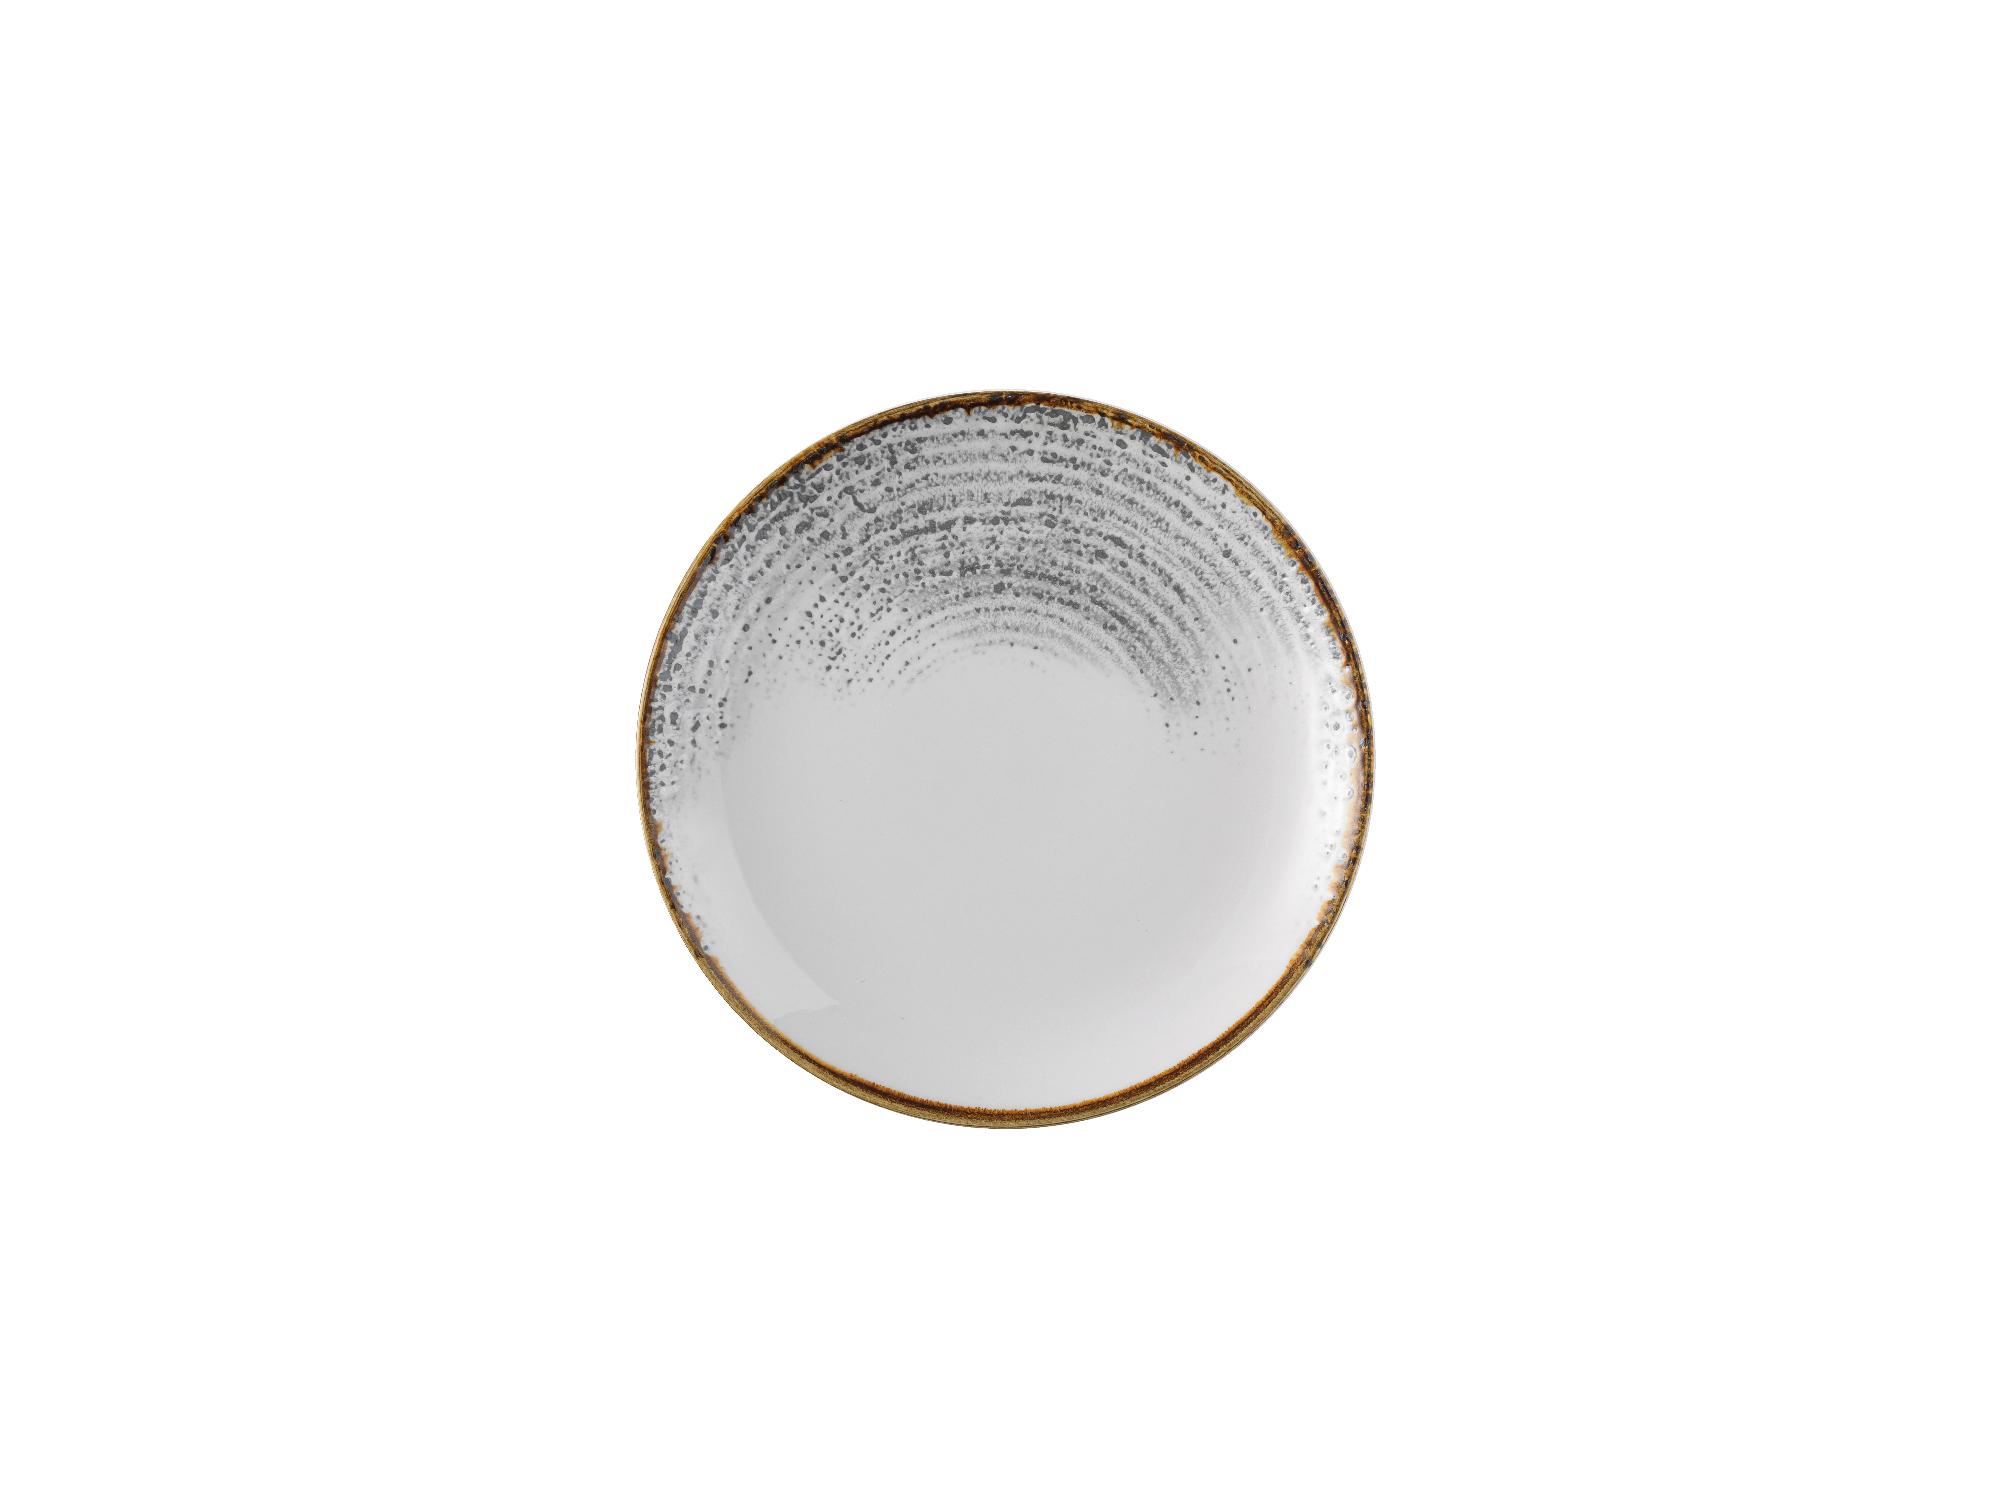 Homespun Accents Jasper Grey coupe plate, 165mm